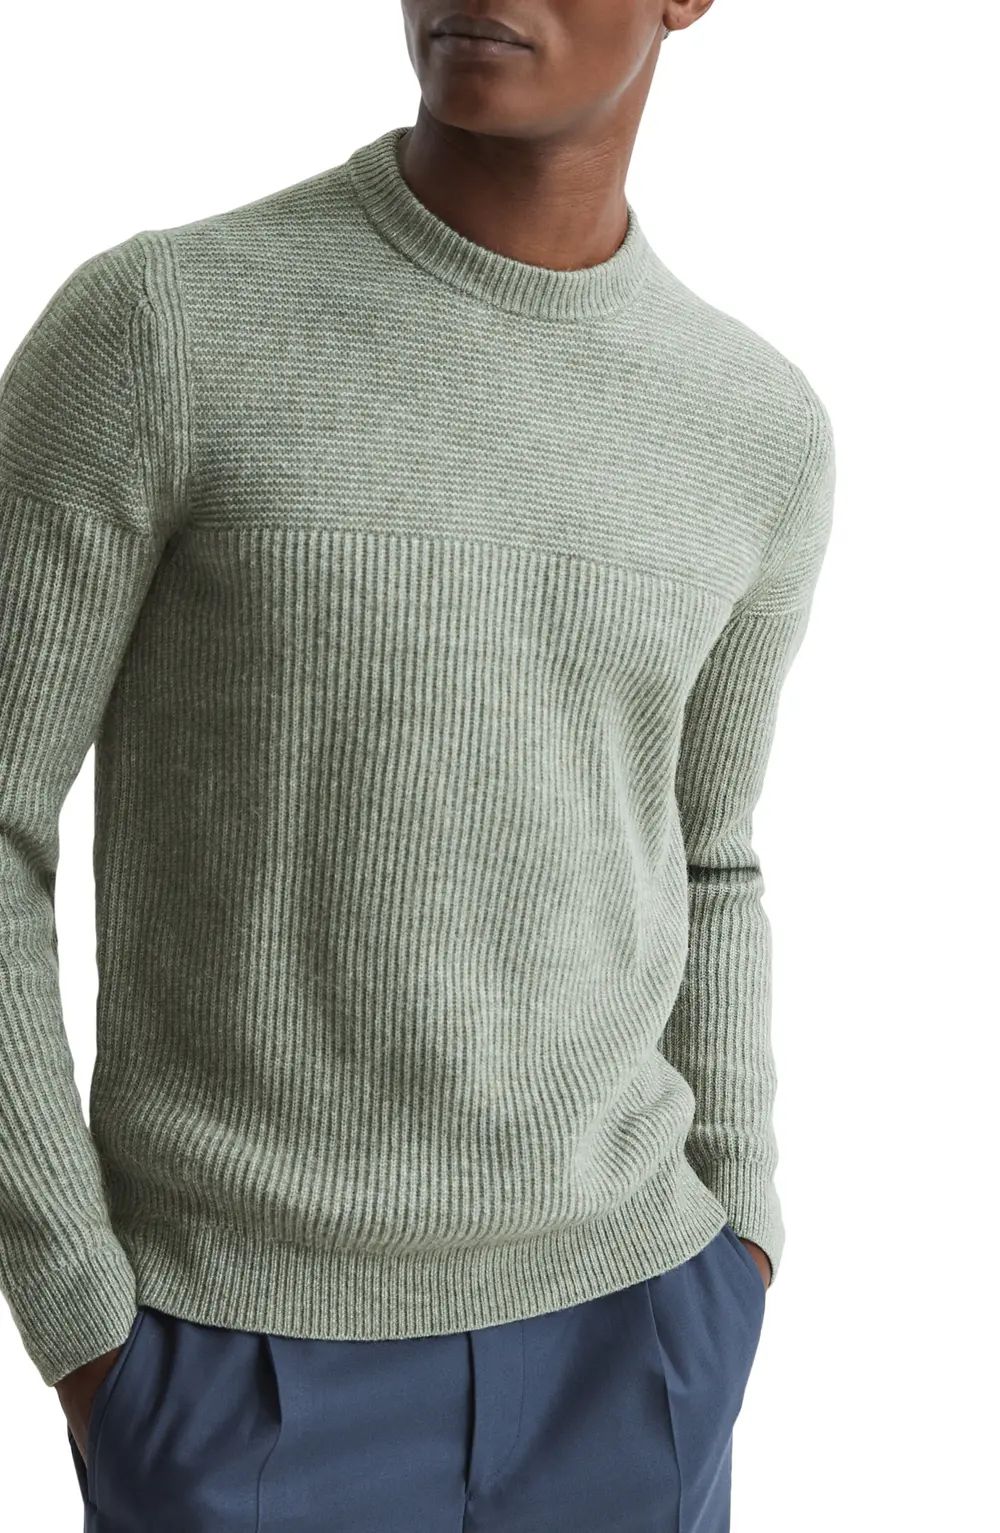 Reiss Marcus Rib Crewneck Sweater, Size Small in Sage at Nordstrom | Nordstrom Canada